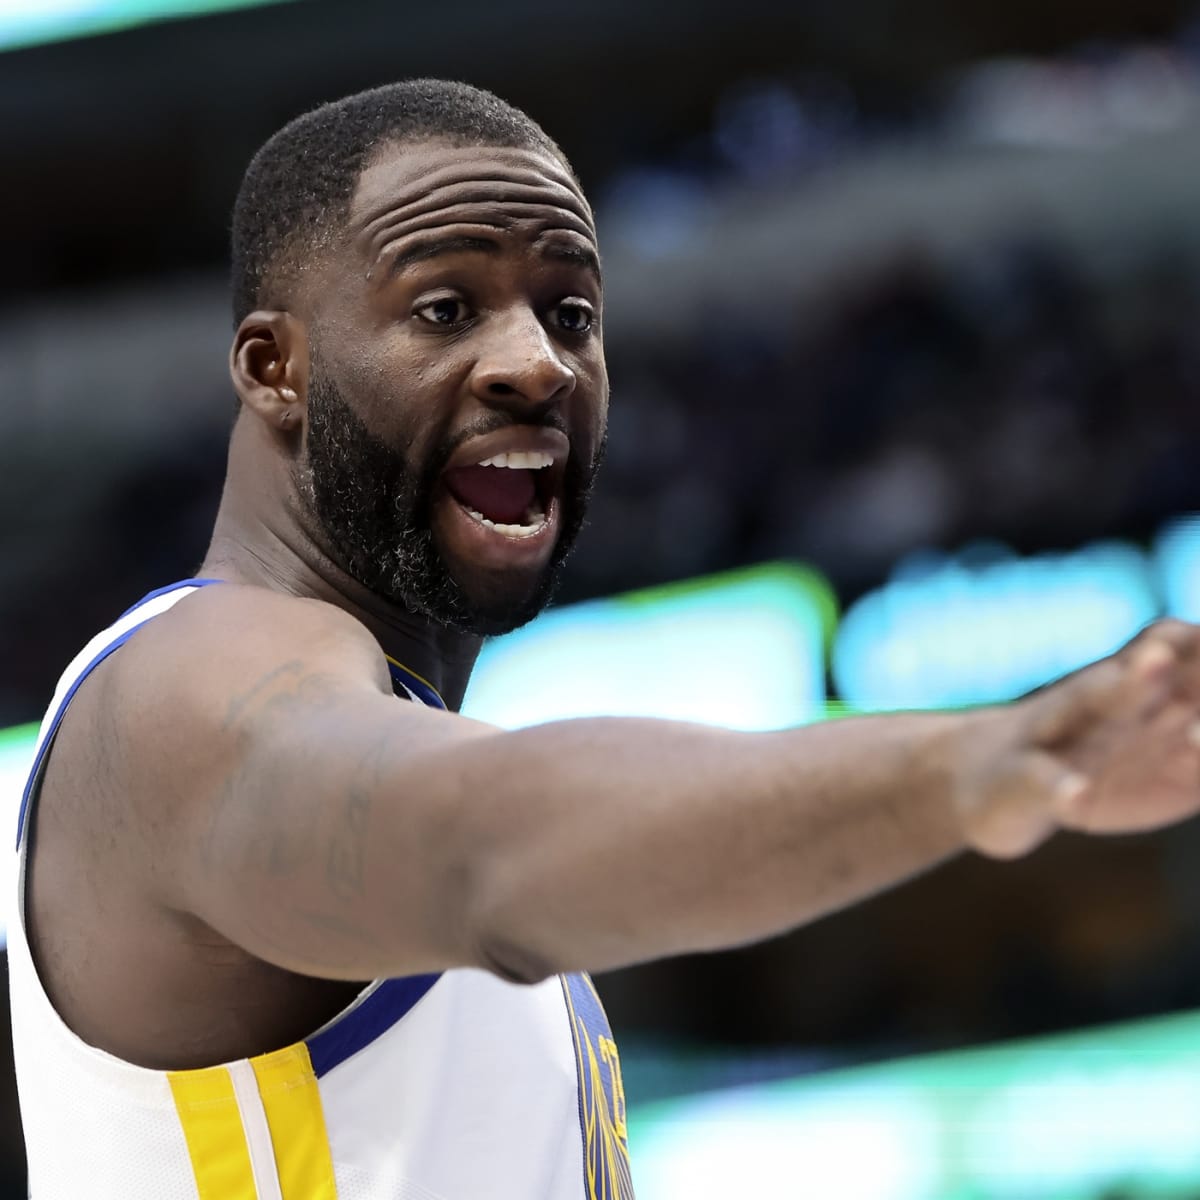 Draymond Green & Russell Westbrook have a war of words in the media